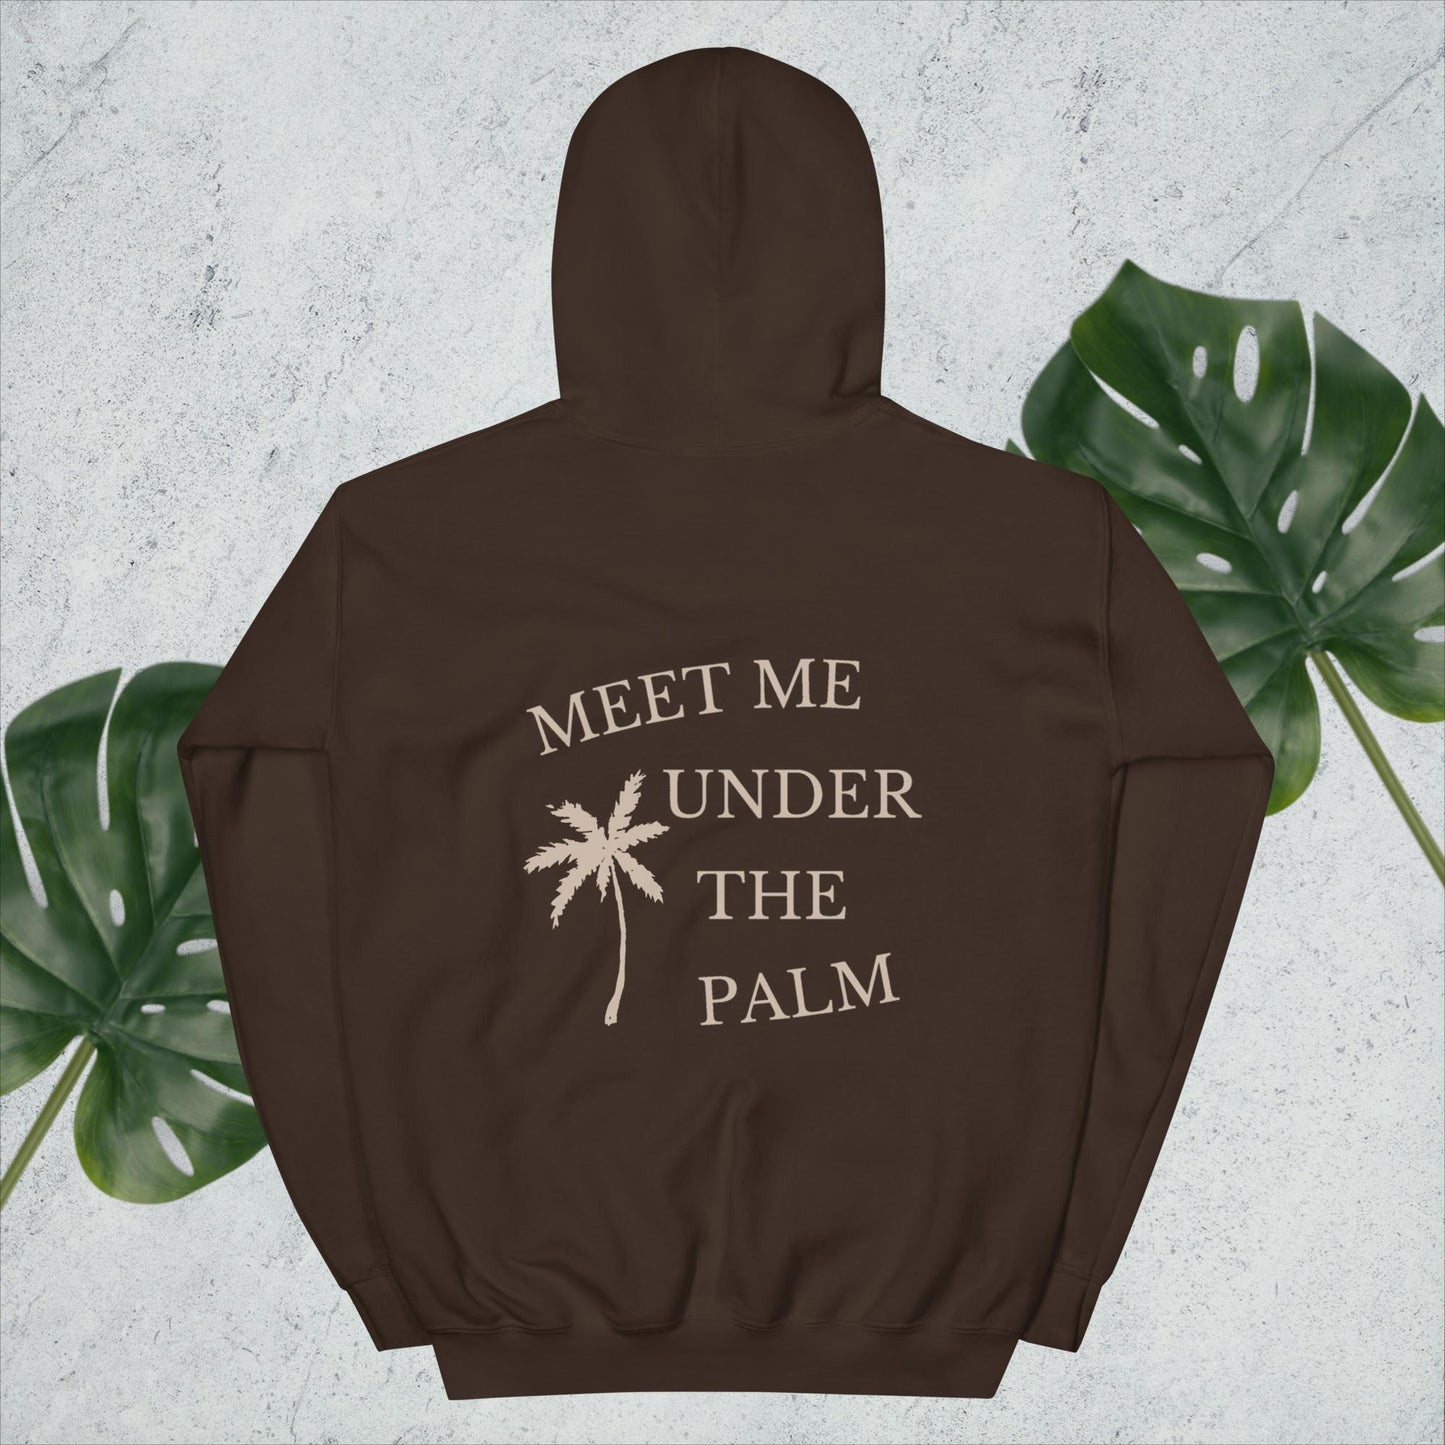 Meet Me Under the Palm (Coffee)